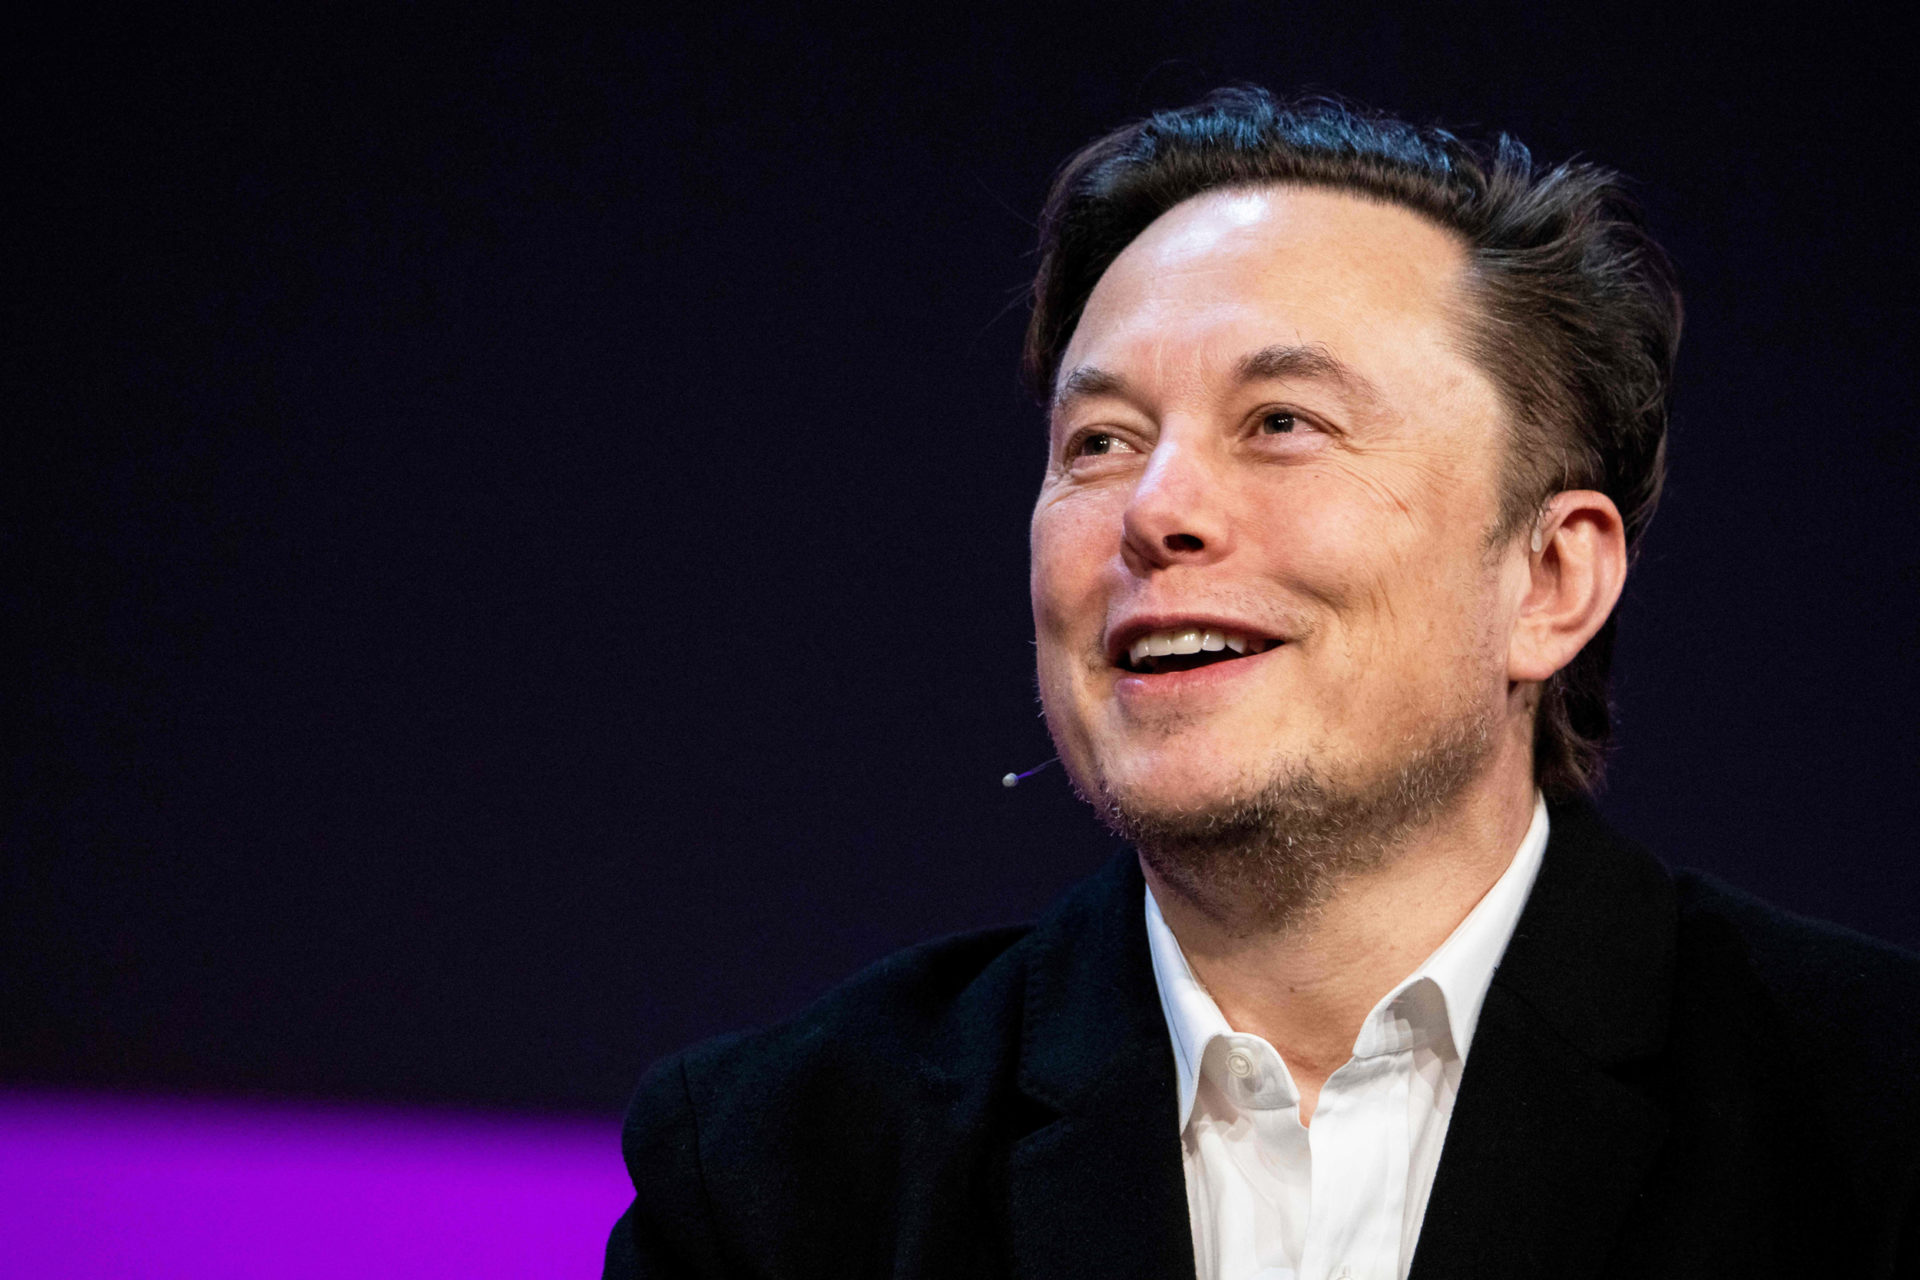 I don't mind going to hell - says Elon musk as tweets 'scary' messages